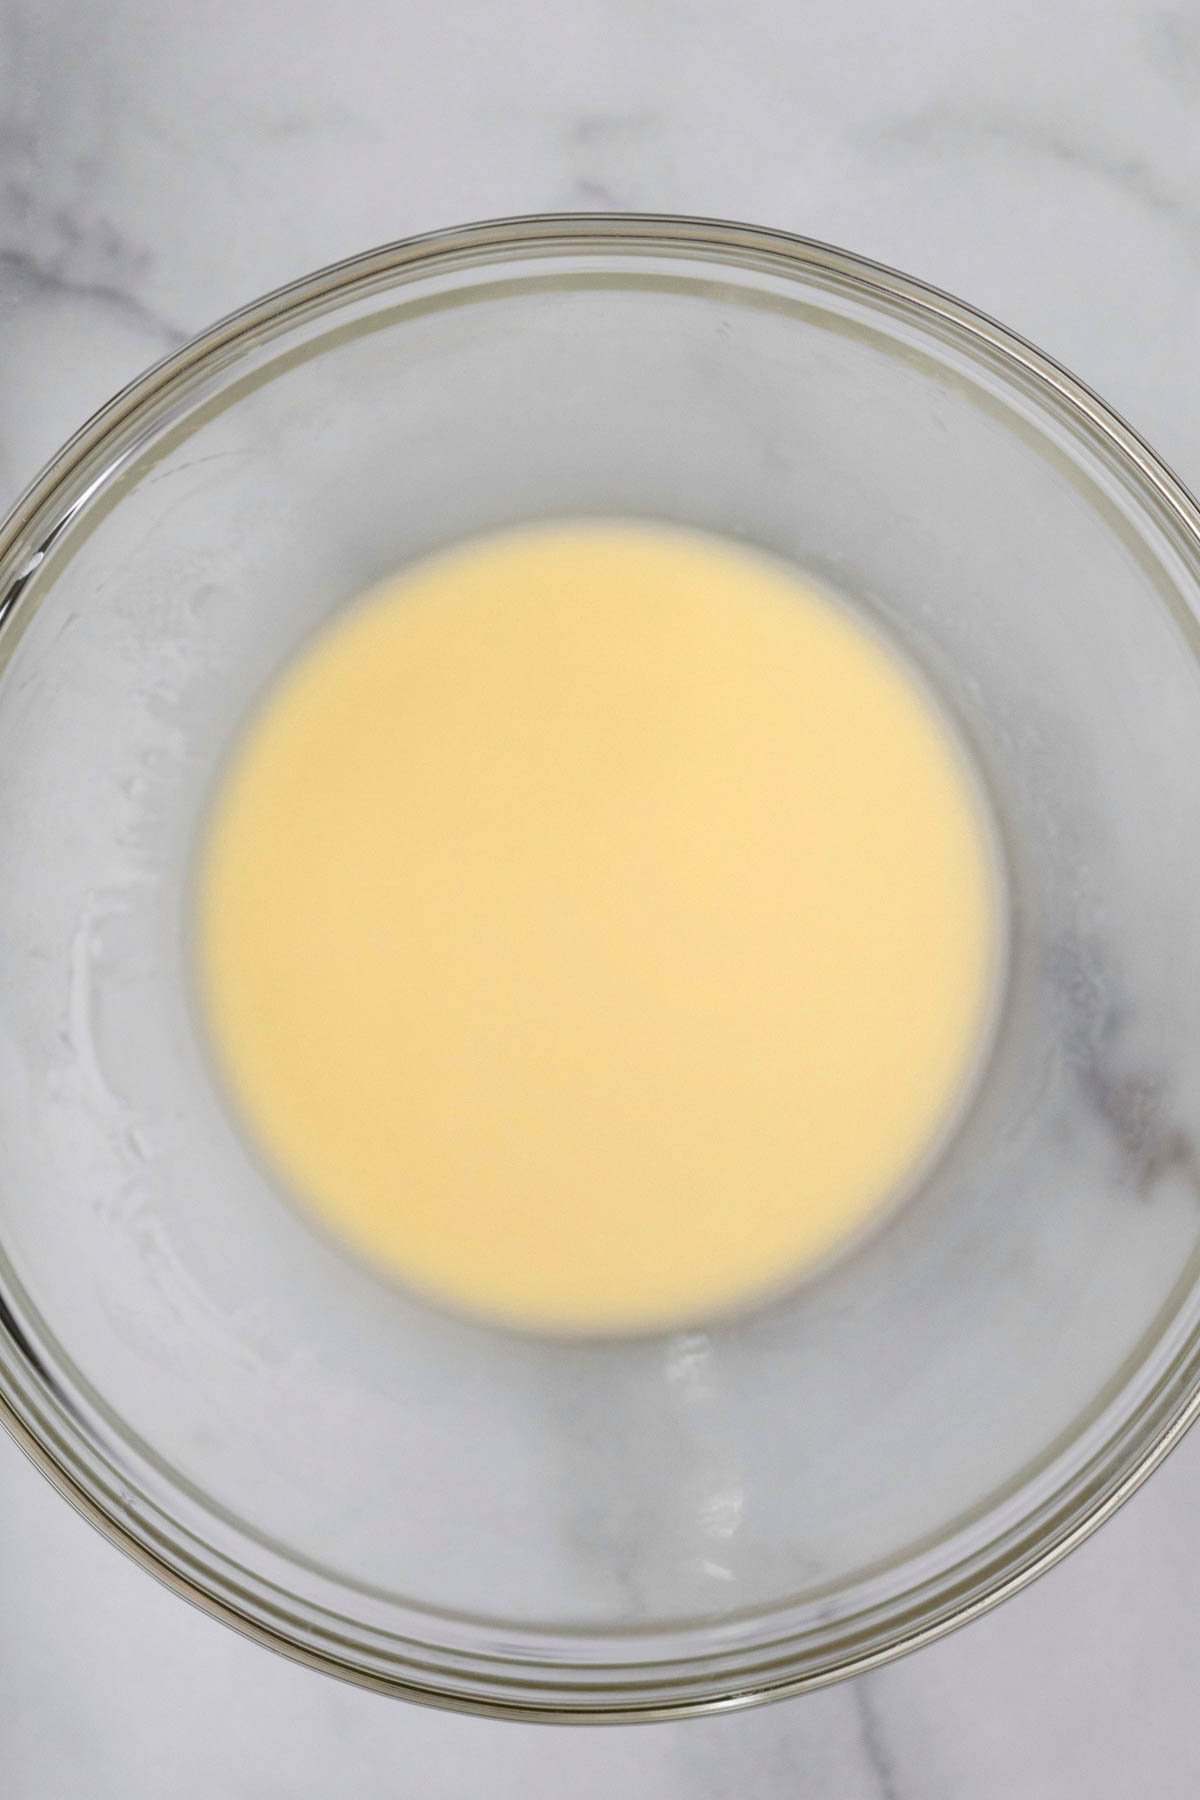 A pool of yellow melted butter.